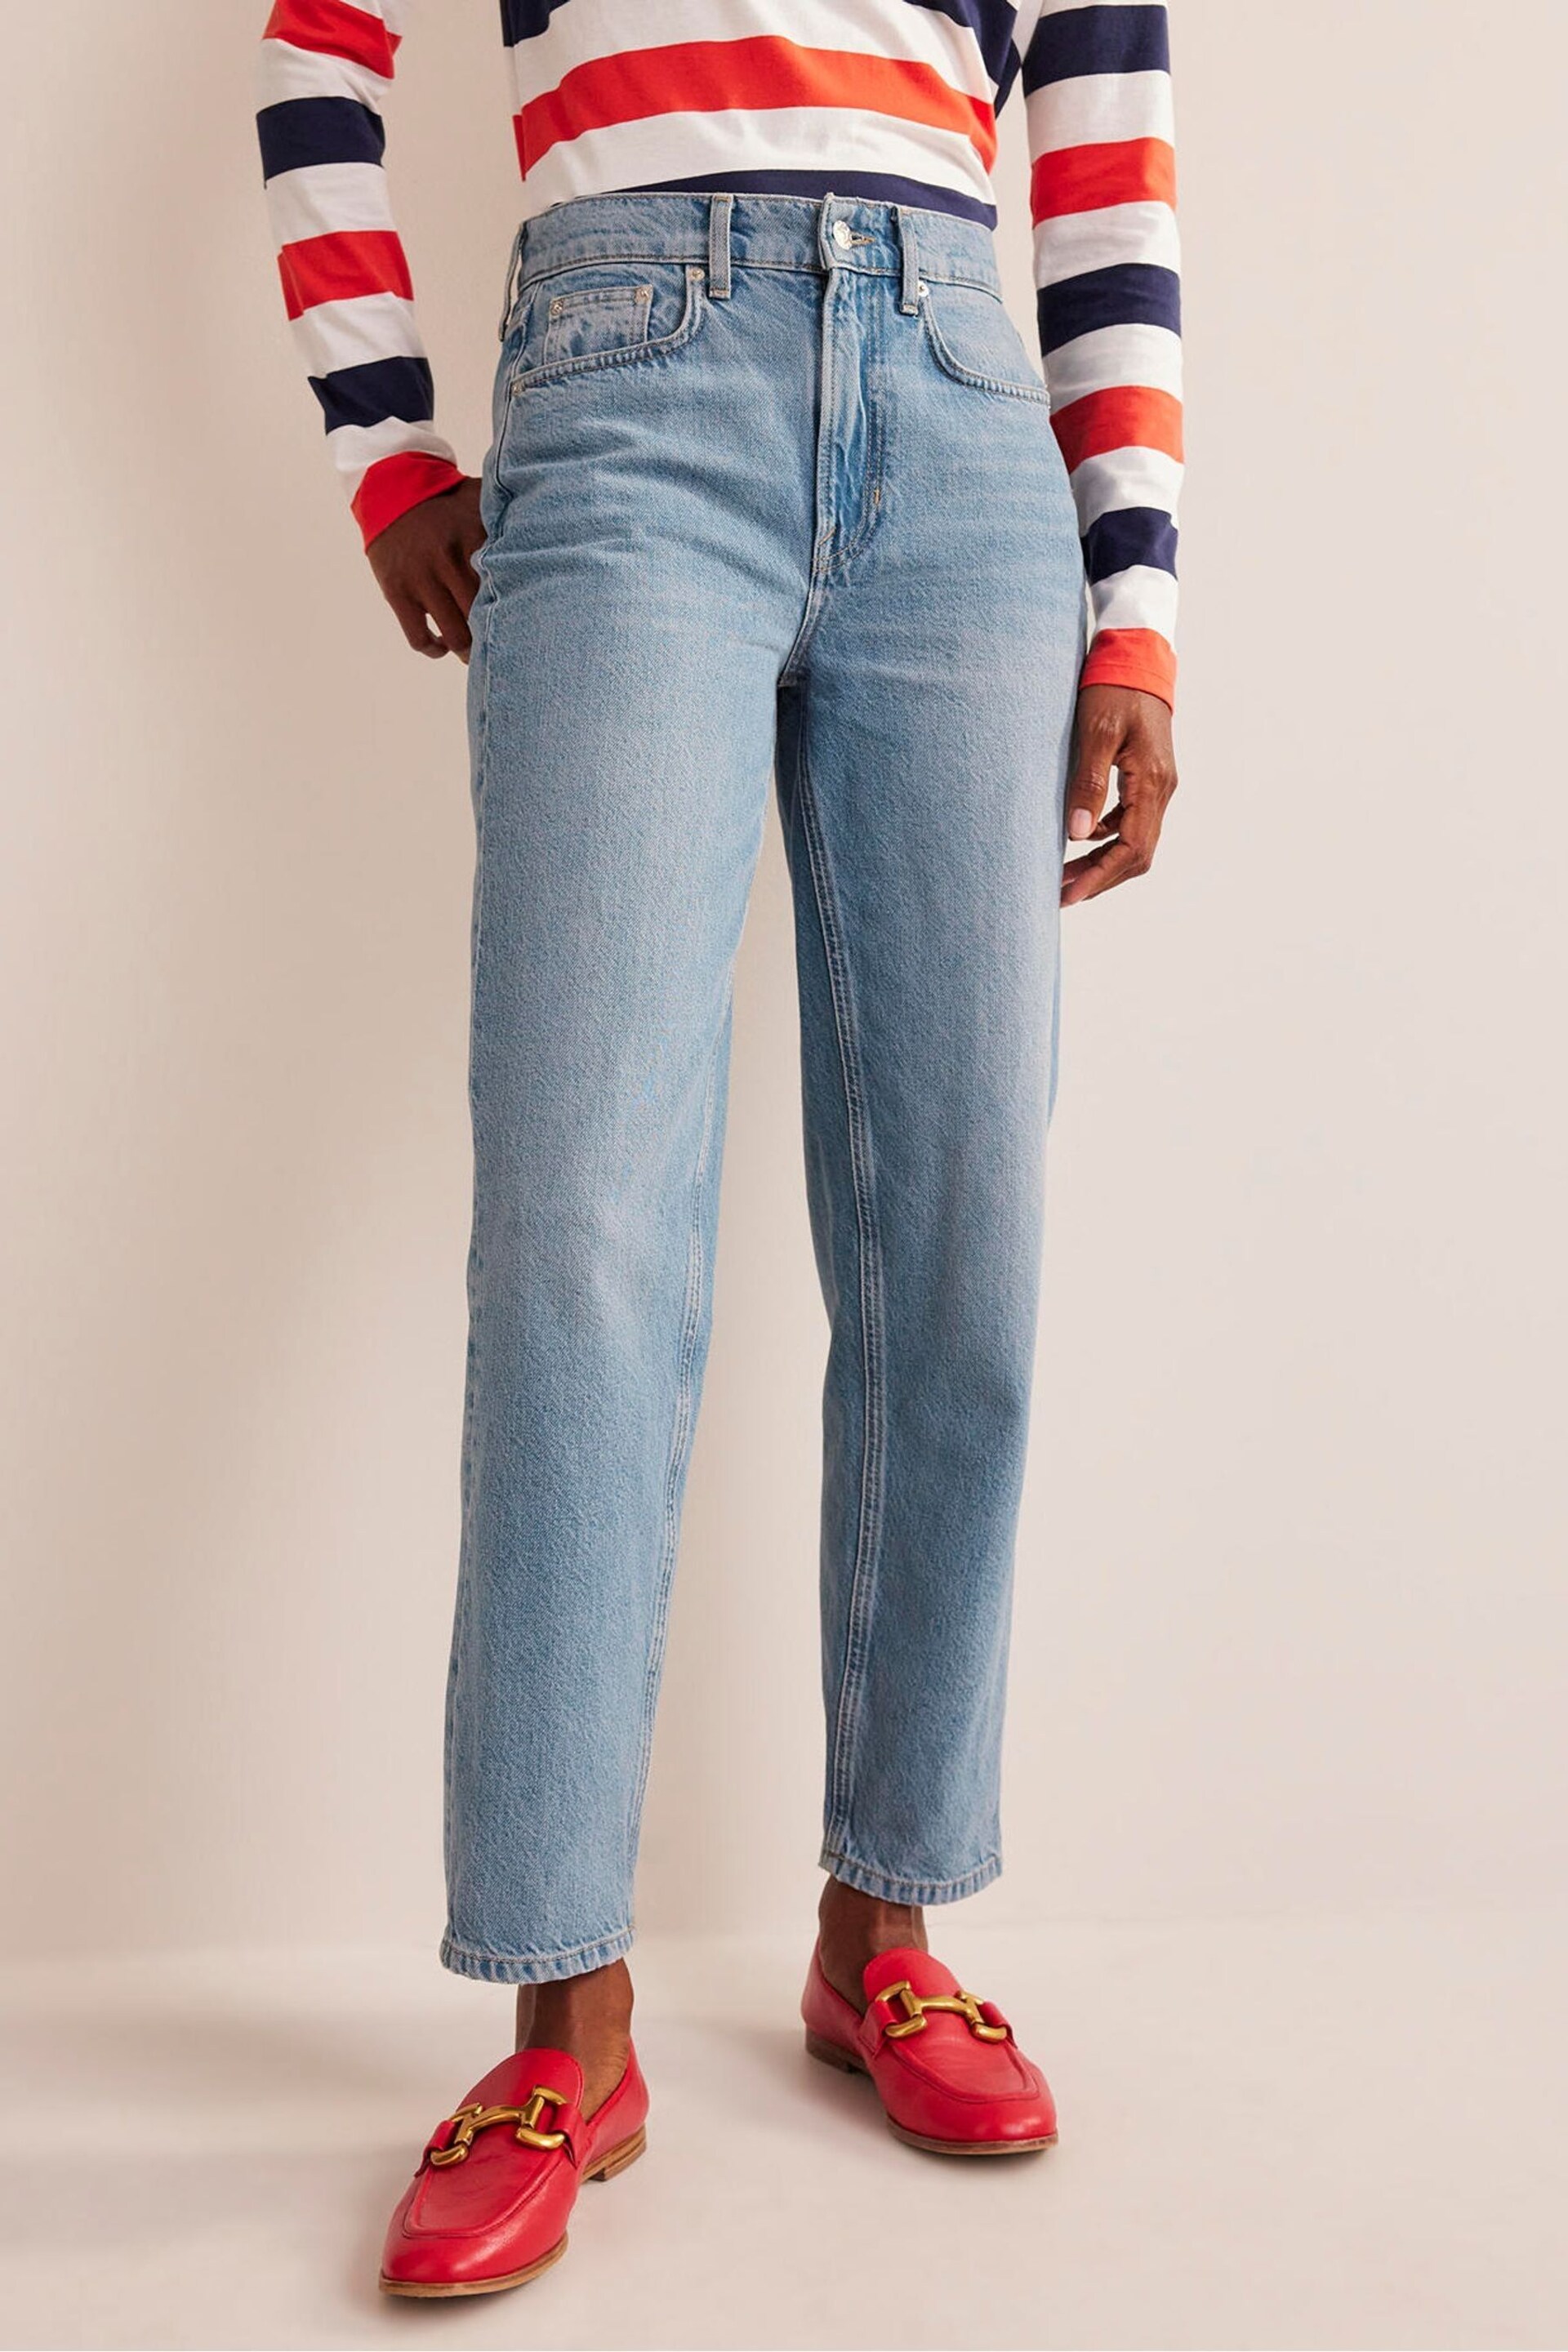 Boden Light Blue Mid Rise Tapered Jeans - Image 3 of 9